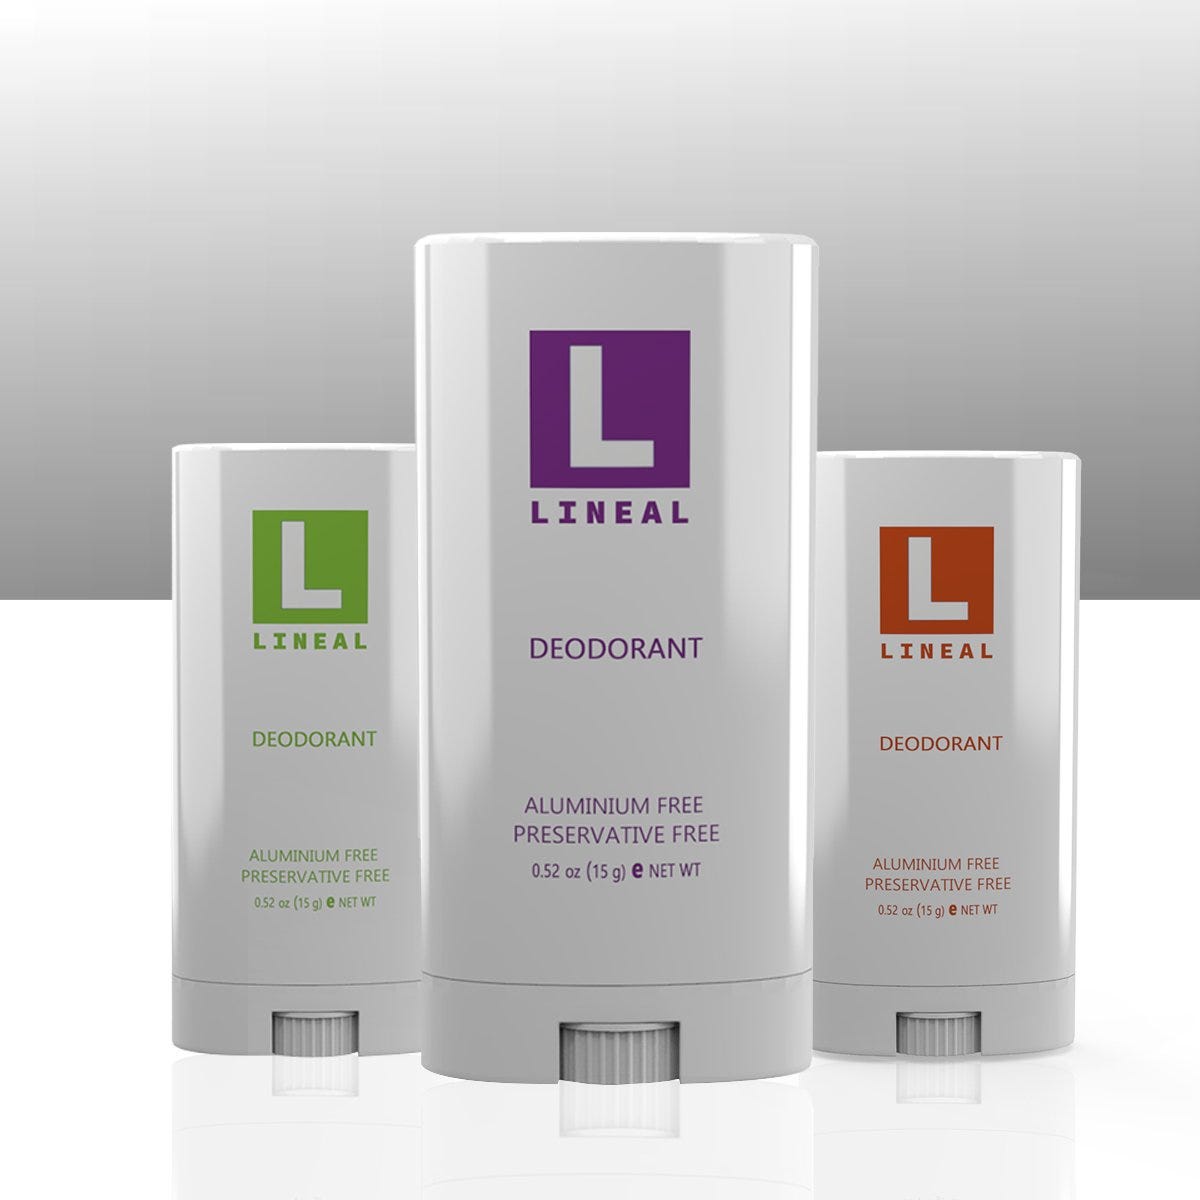 7 Reasons To Switch To Lineal Deodorant By Lineal Deodorant Lineal Deodorant Medium